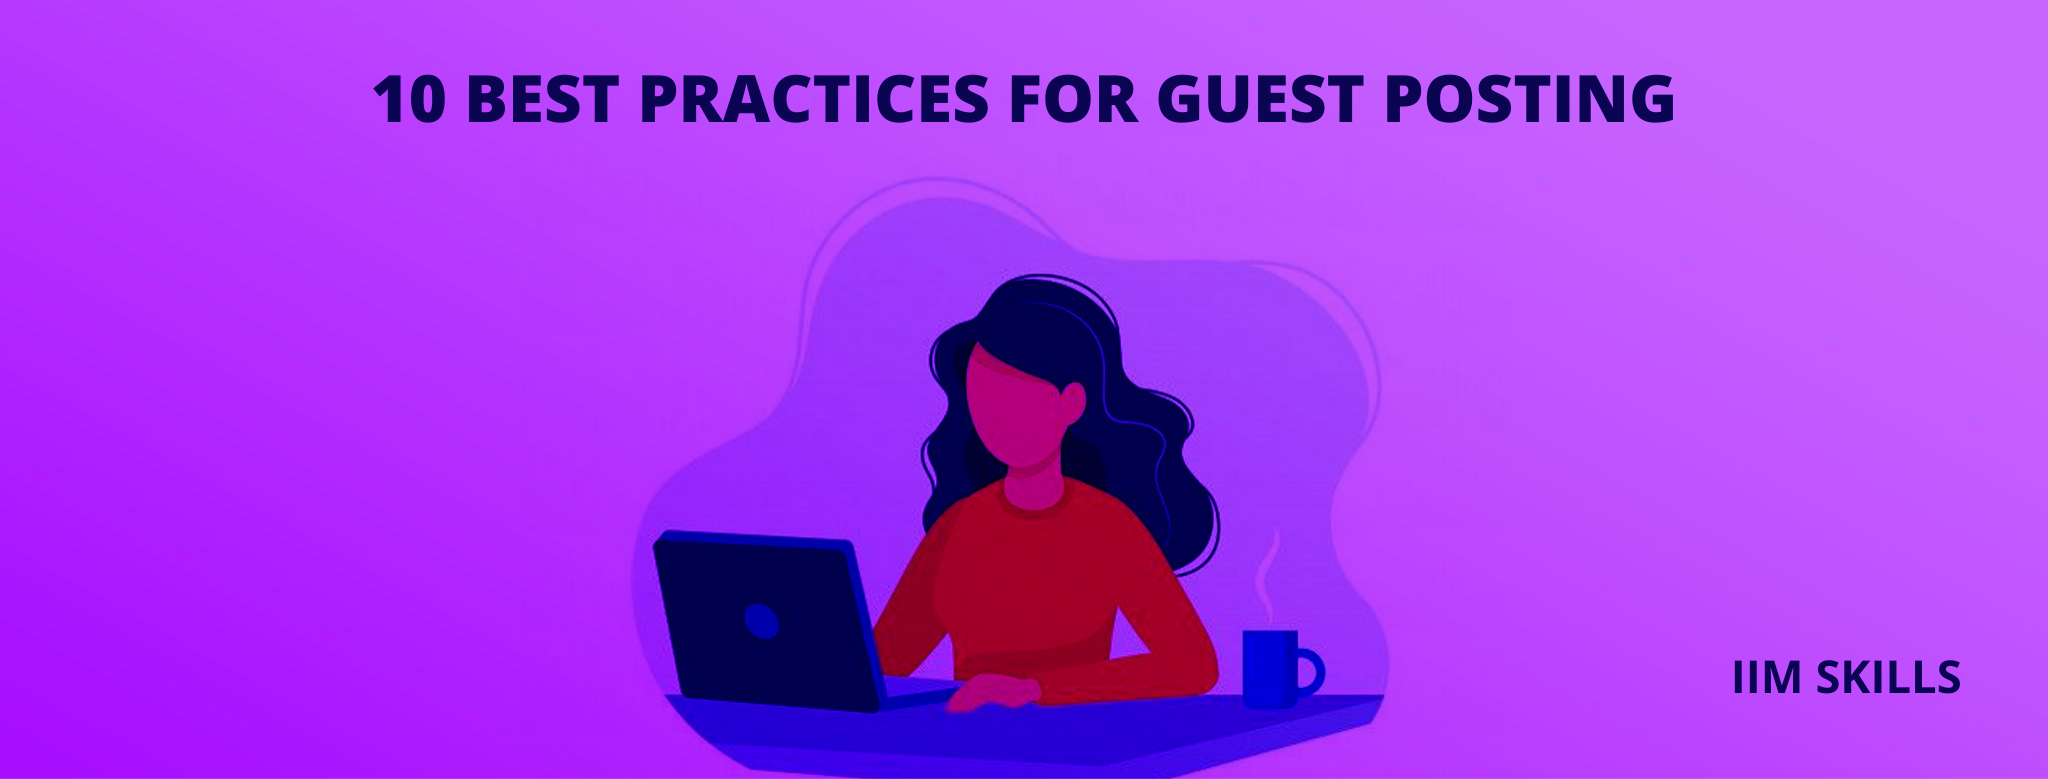 List of best practices for guest posting